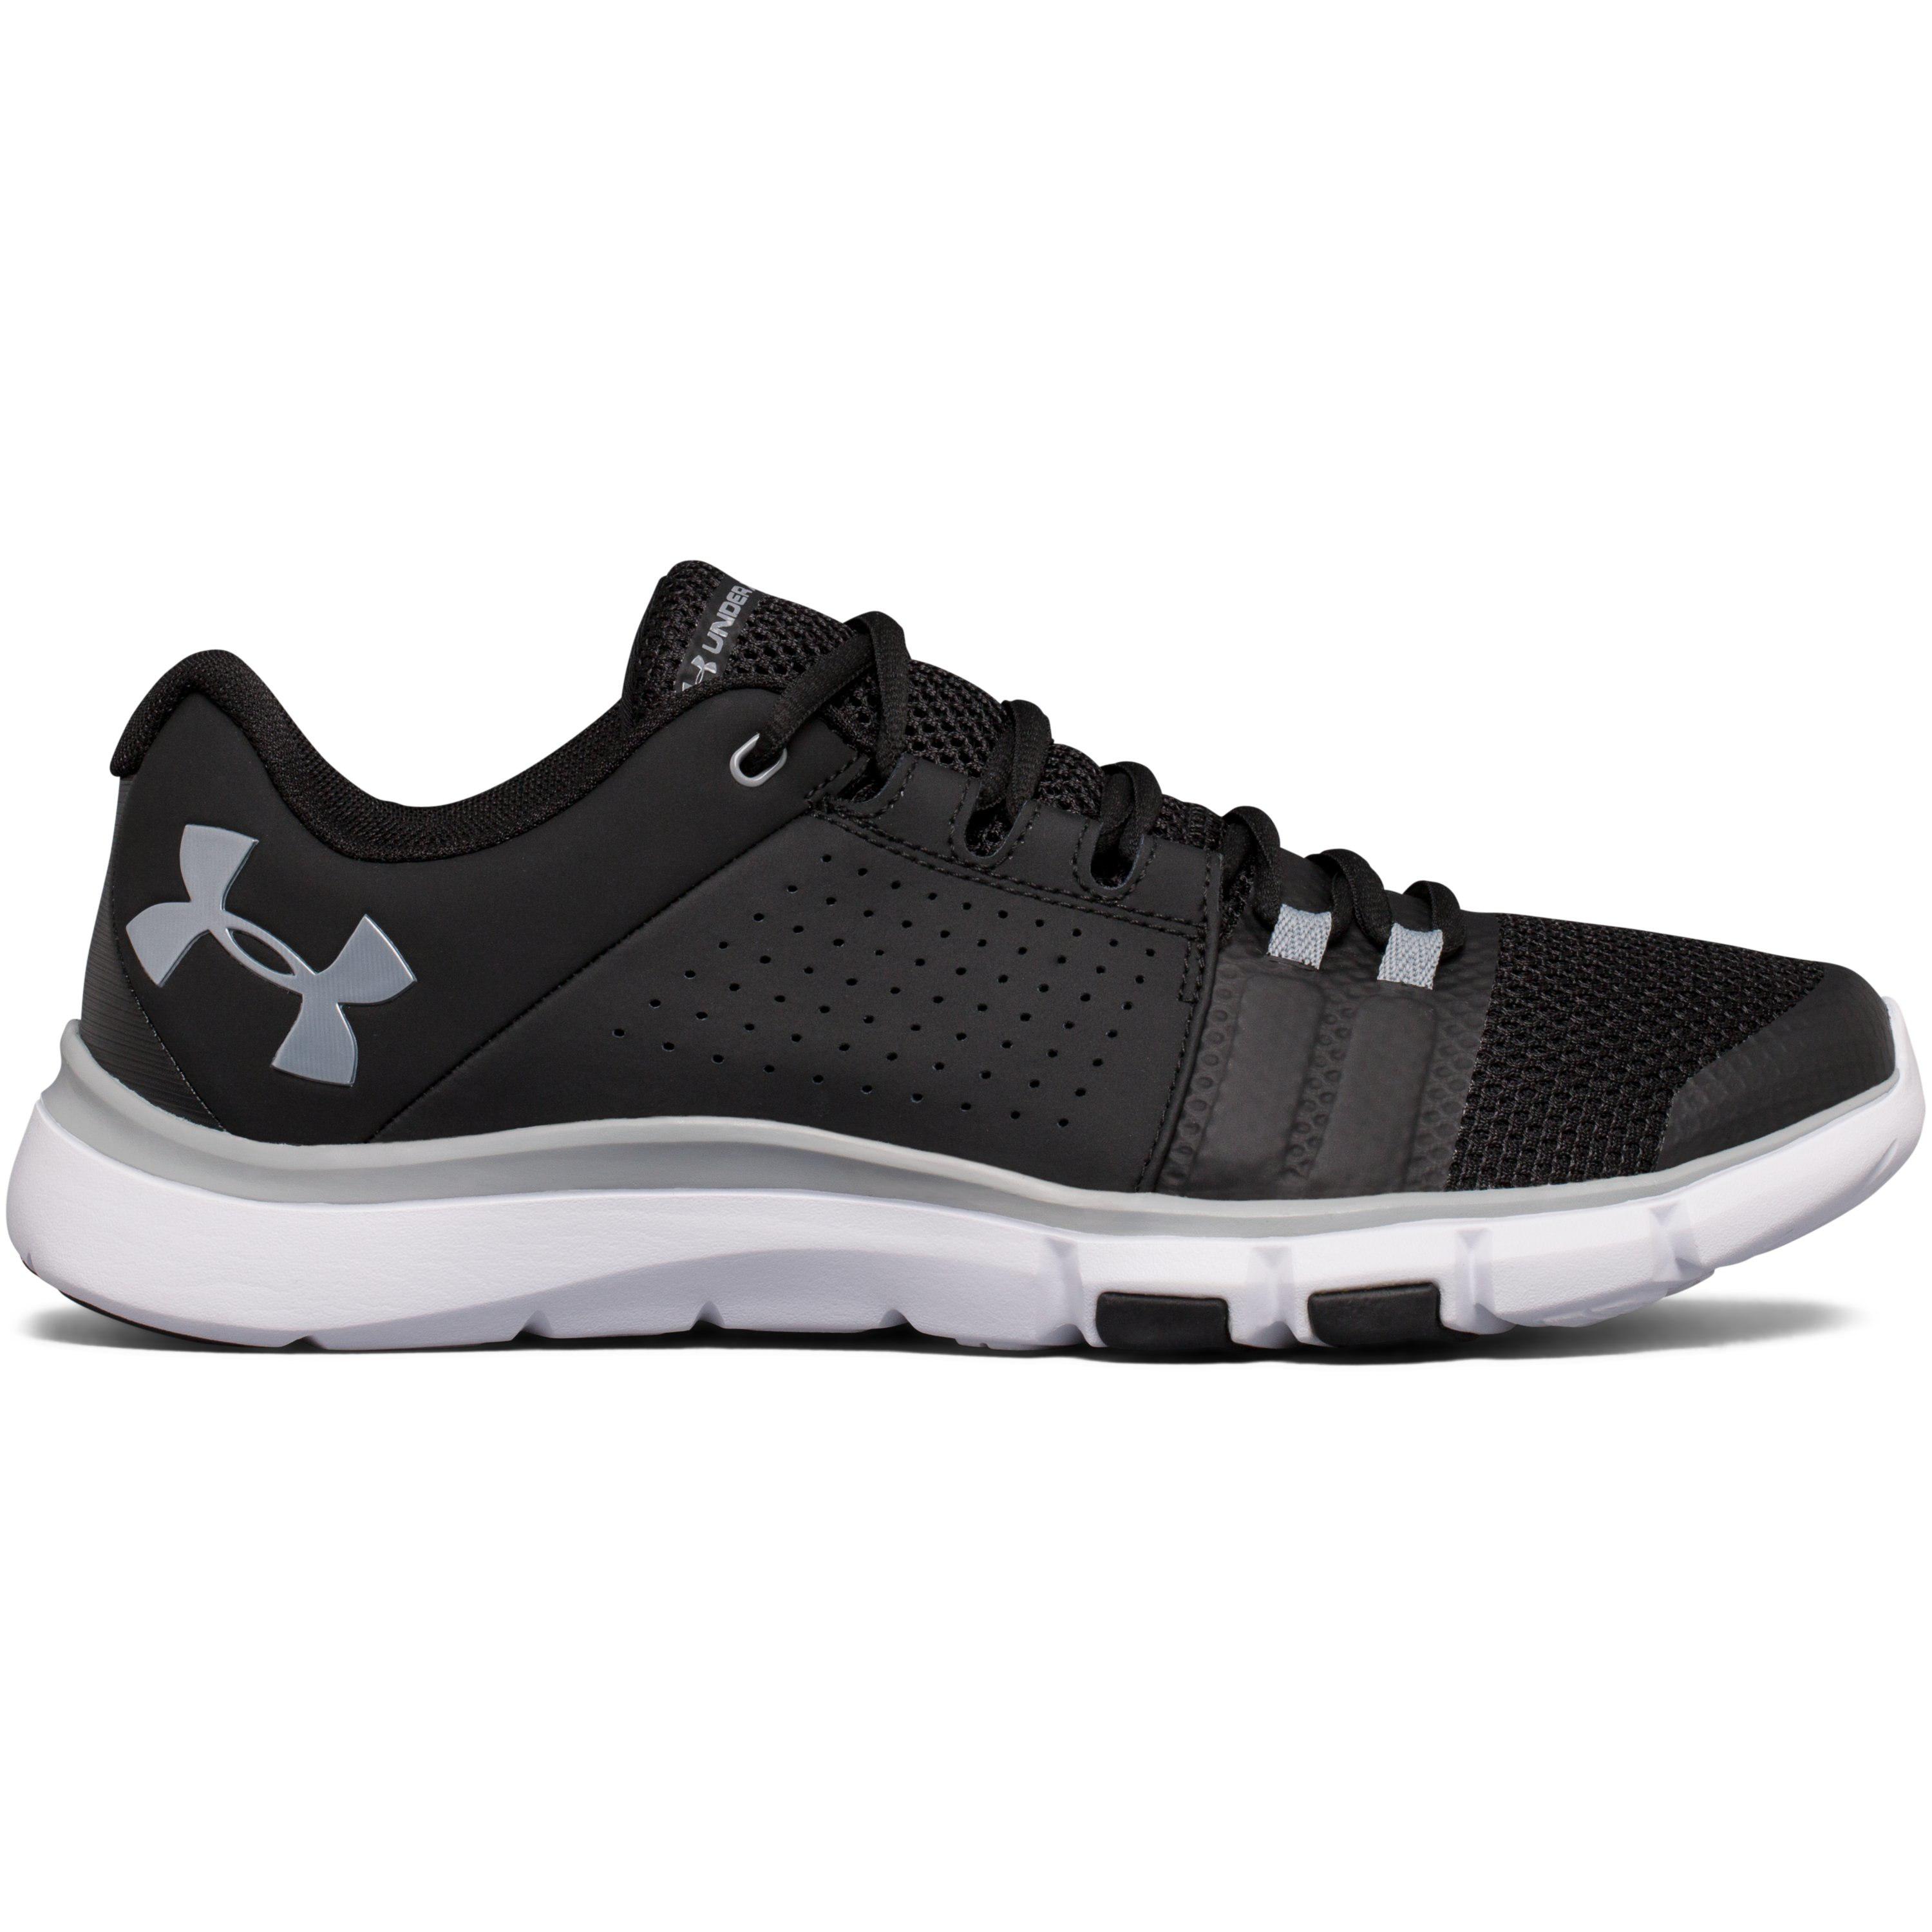 Under Armour Leather Men's Ua Strive 7 – Wide (2e) Training Shoes in Black  /White (Black) for Men | Lyst